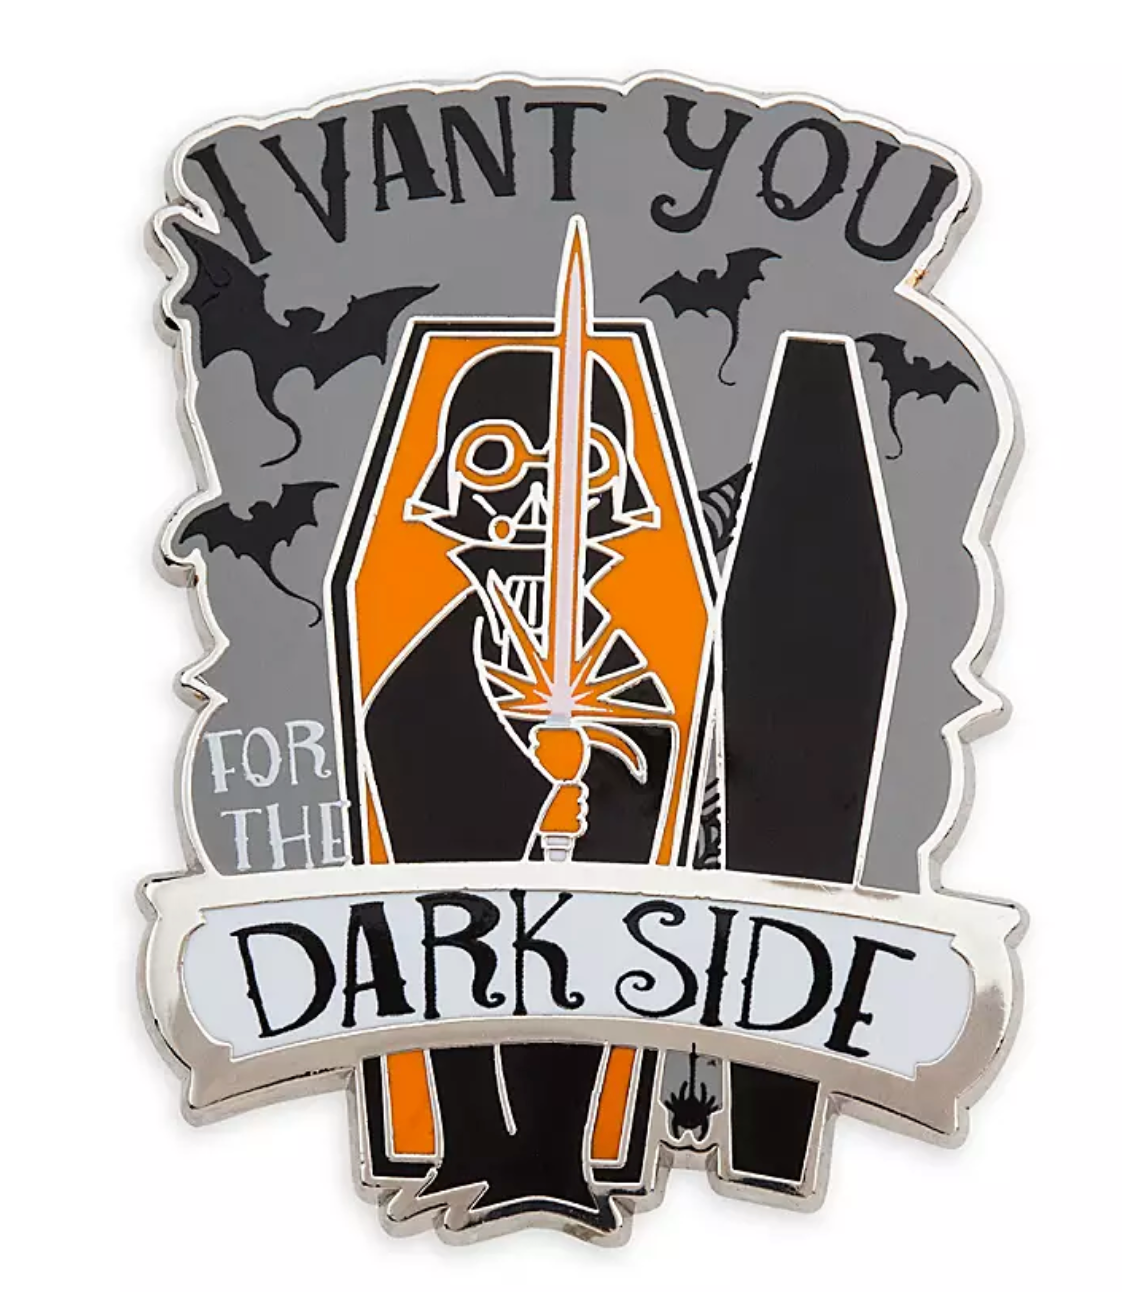 Disney Parks Halloween Darth Vader I Want You for the Dark Side Pin New w Card